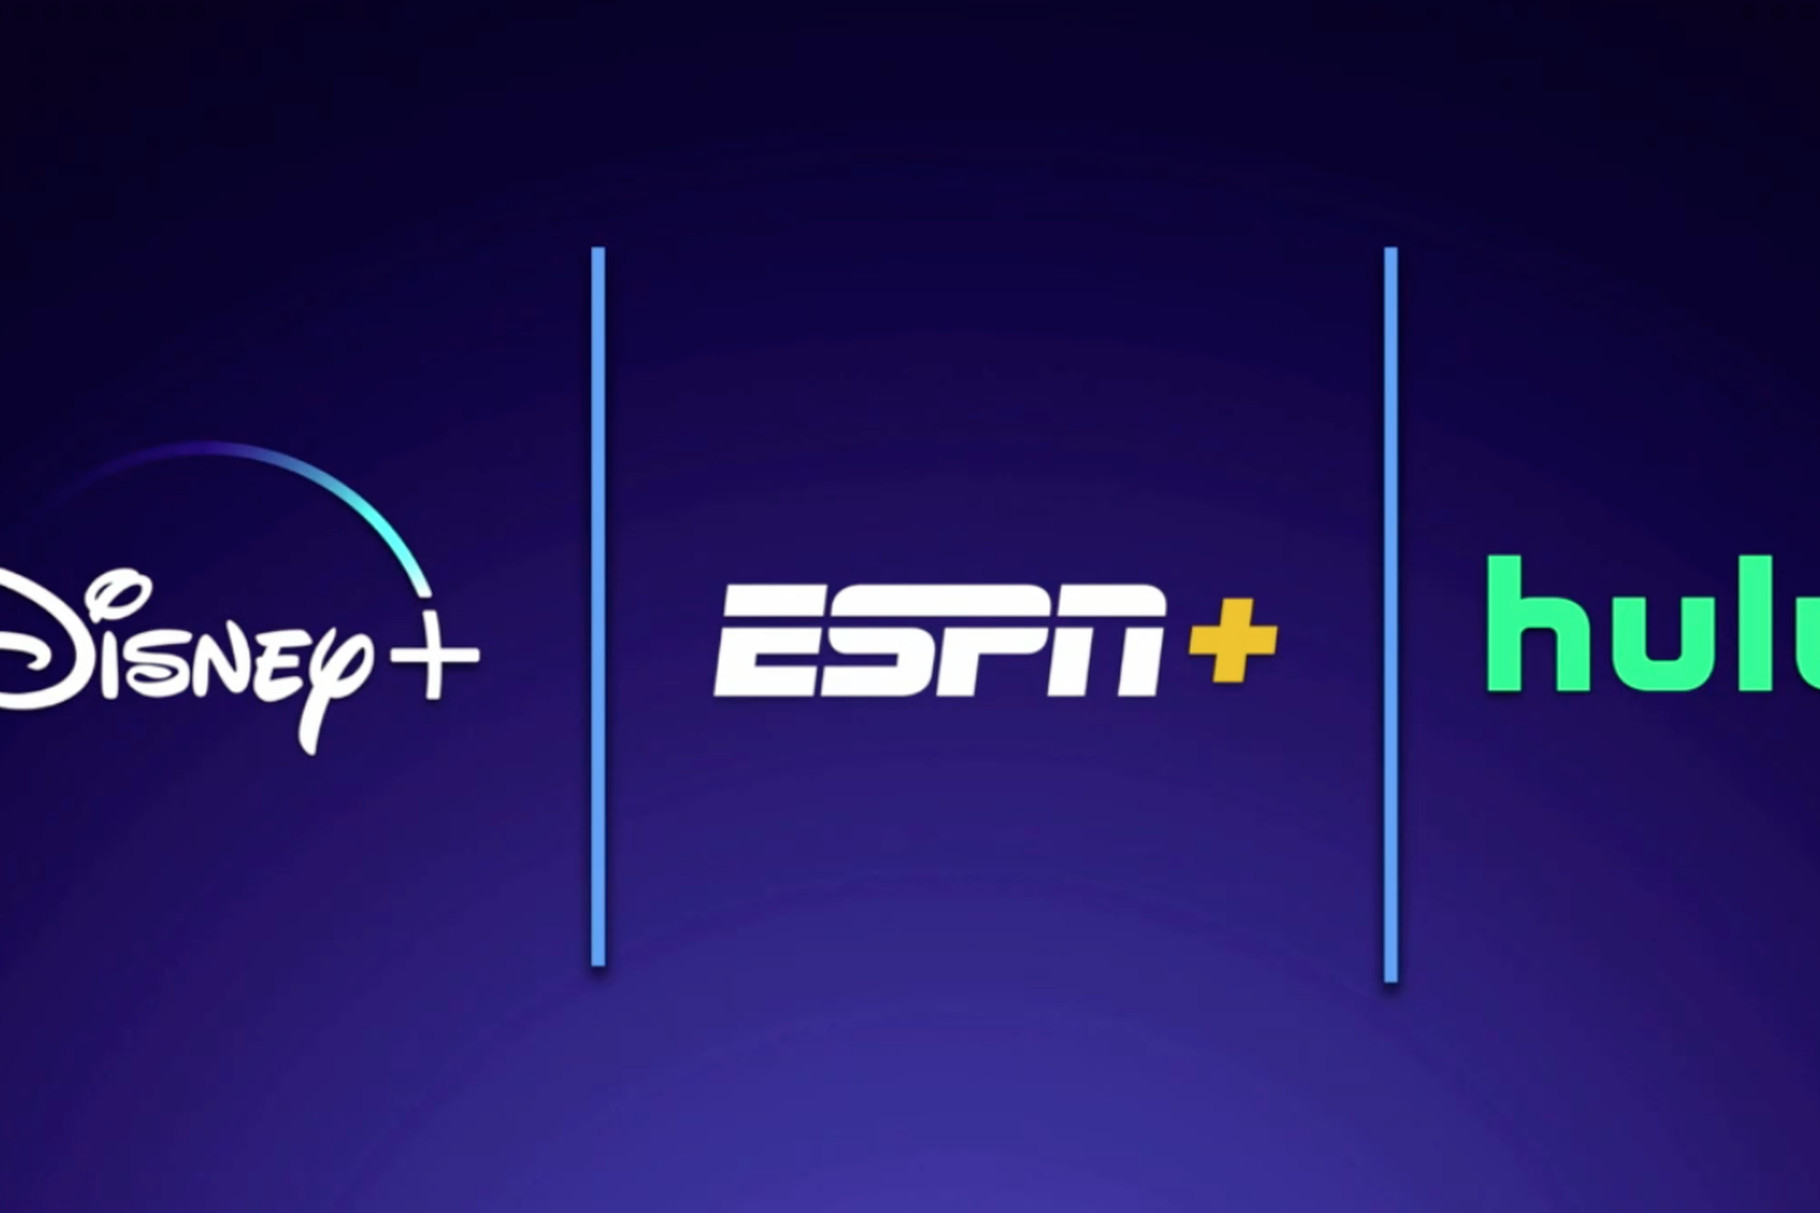 Marketing image showing the logos for Disney+, ESPN+ and Hulu set against a dark blue background